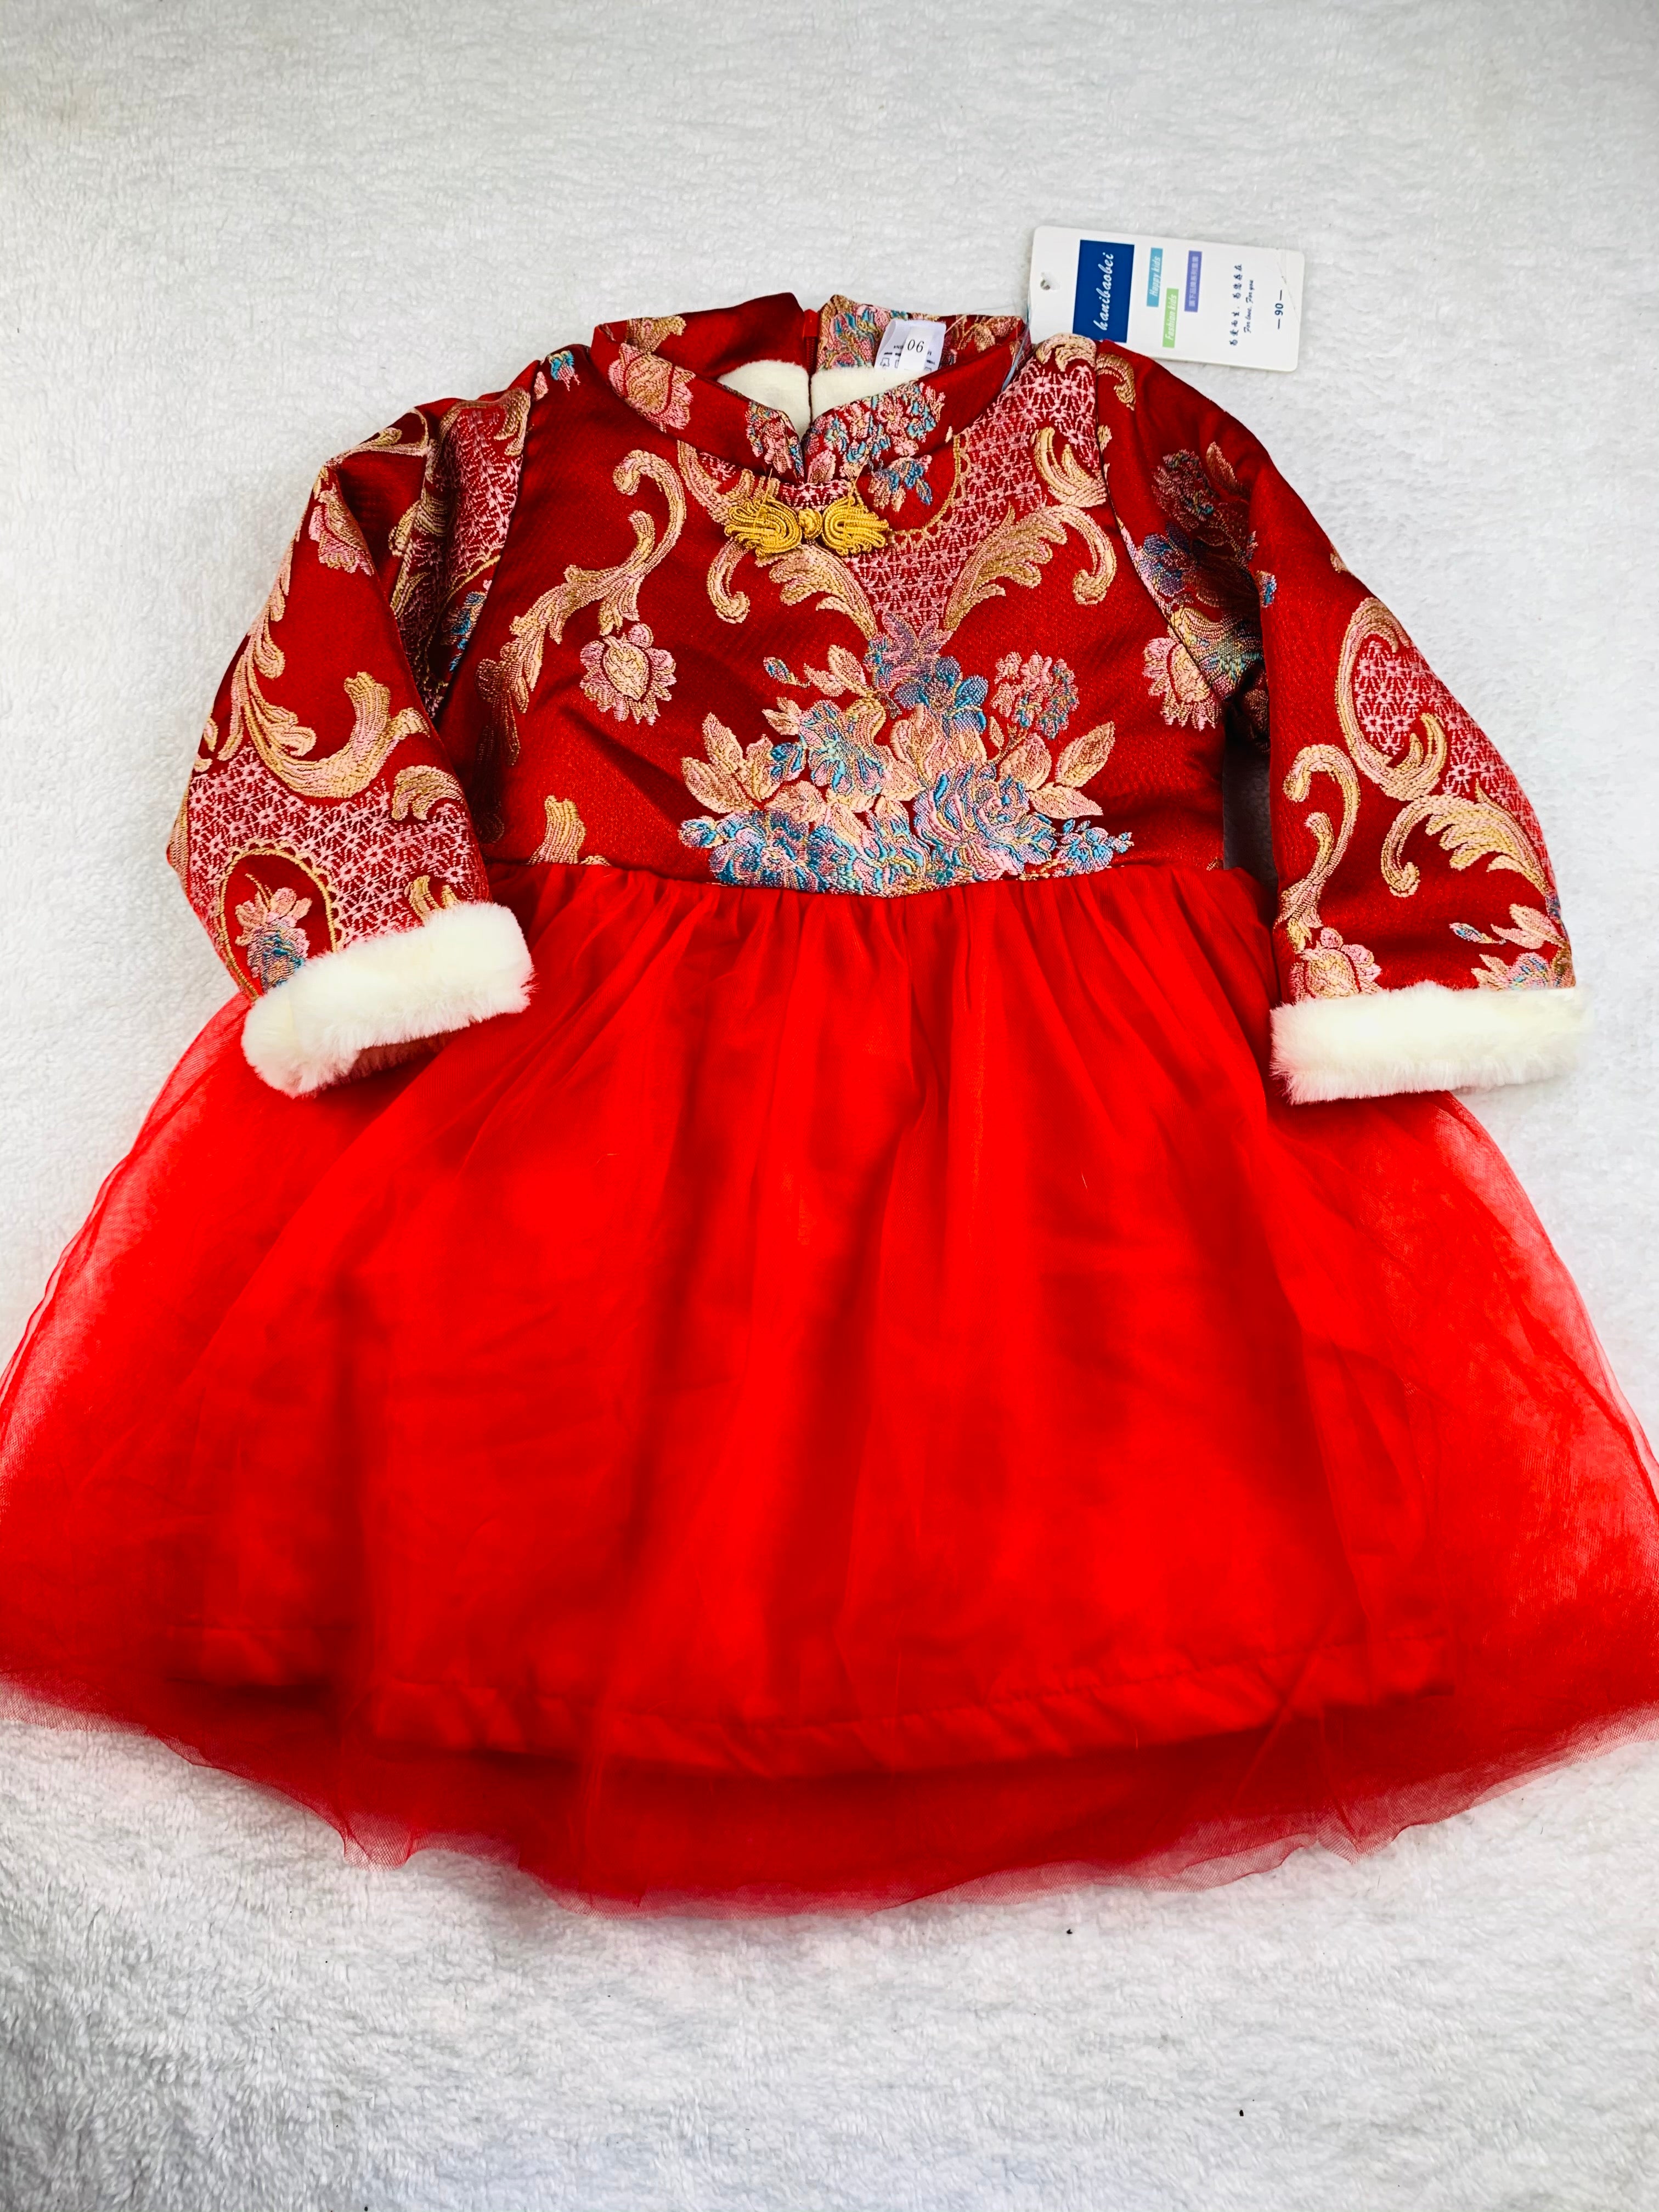 Resell International fur lined dress available in 2t and 4t